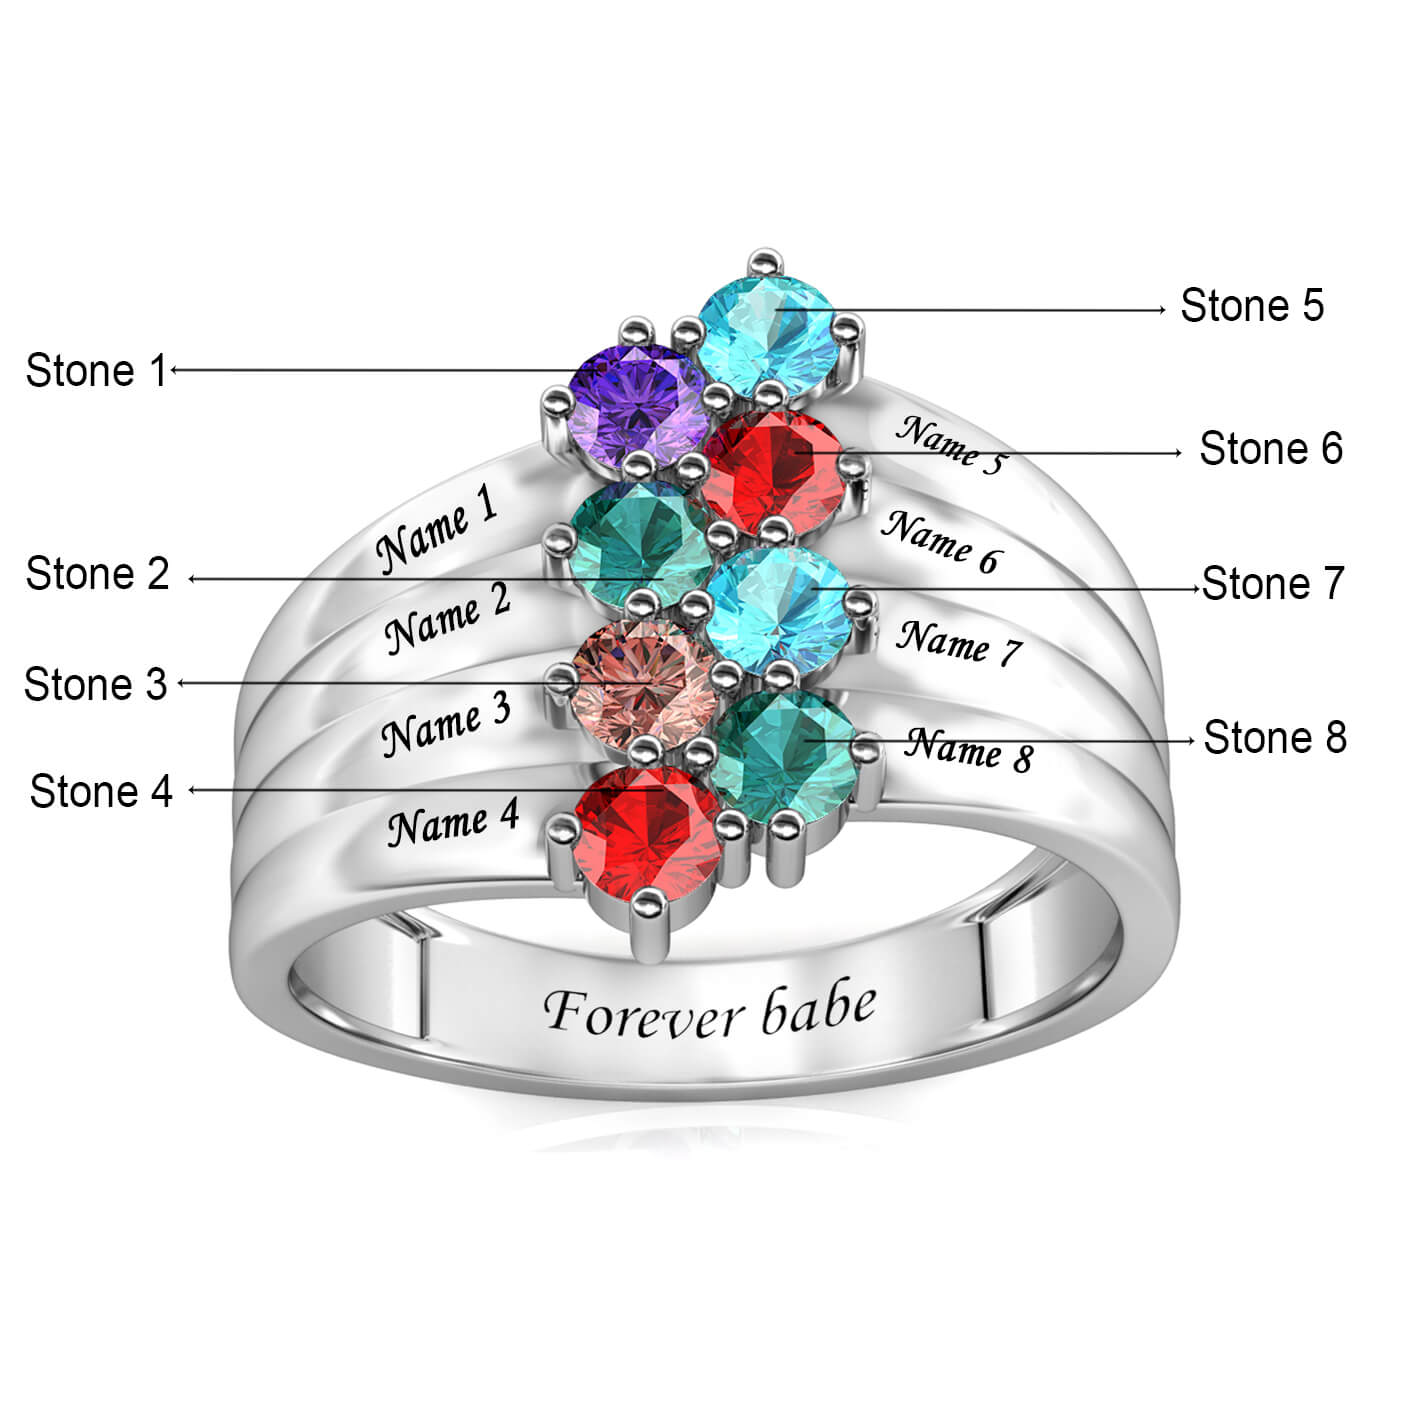 Family Birthstone Rings - Anthony's Jewelers - (401) 996-2100